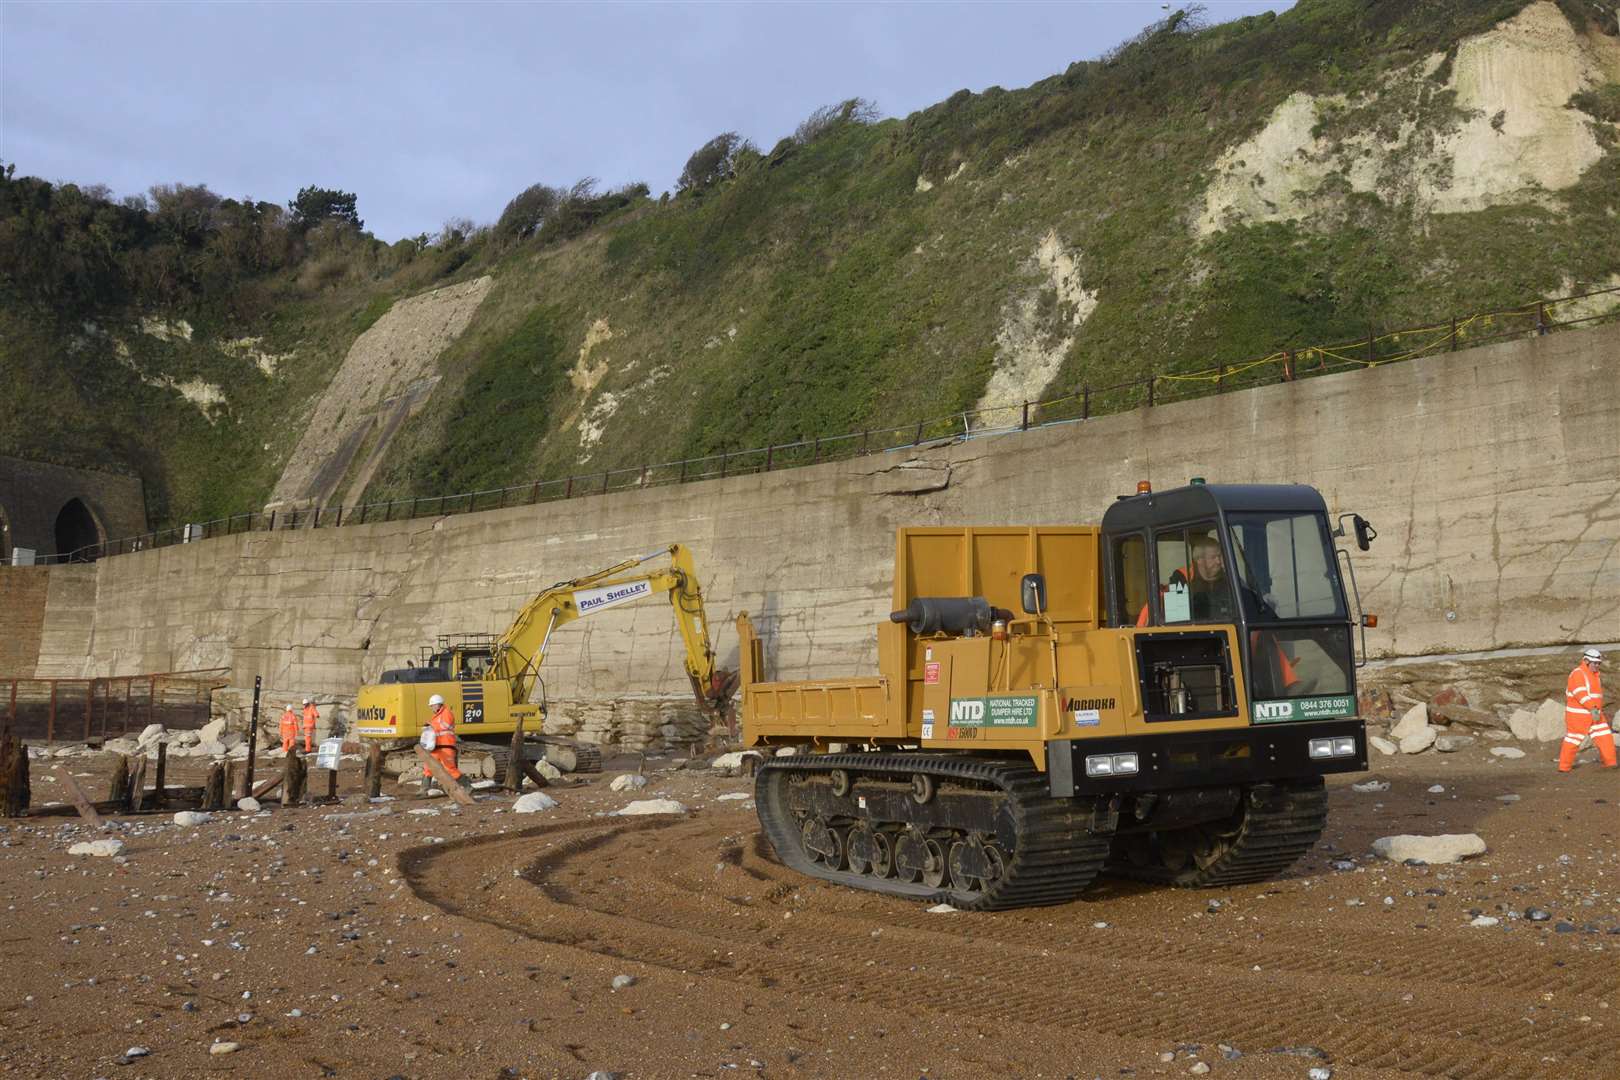 Repair work is underway on the damaged sea wall and railway embankment near Shakespeare Cliff tunnel between Dover and Folkestone.